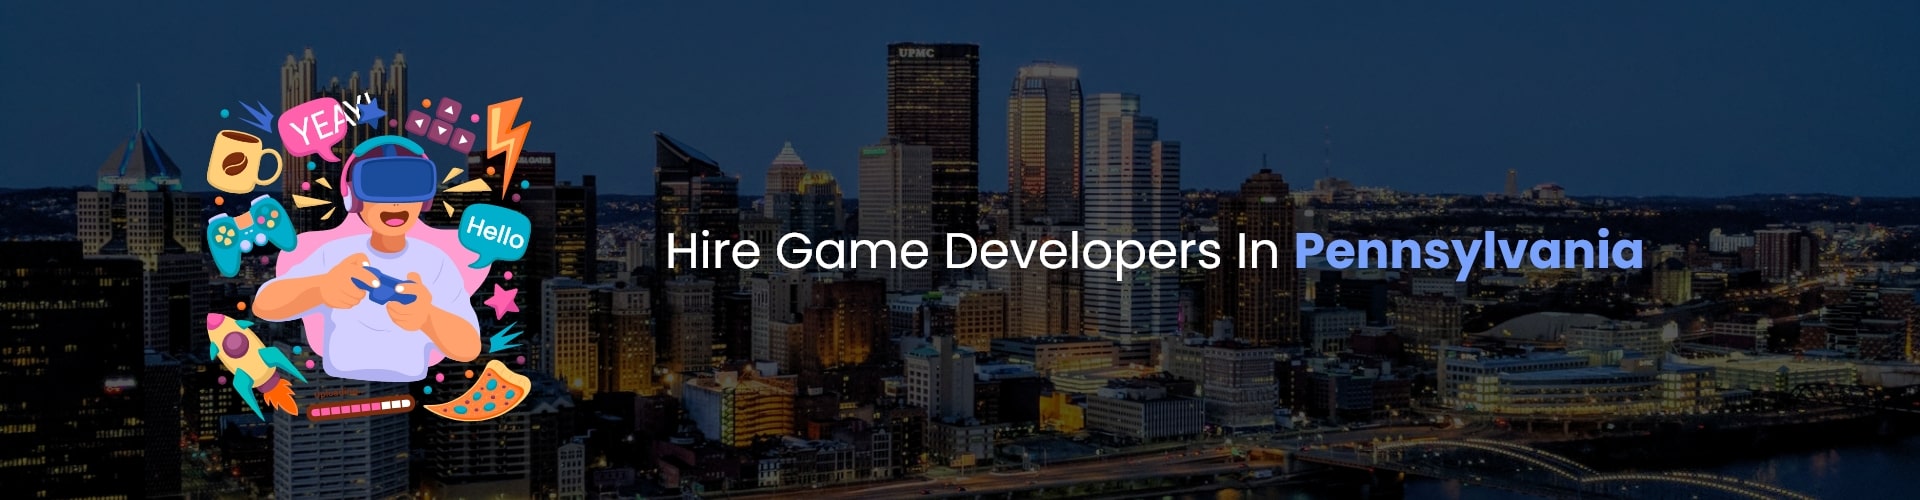 hire game developers in pennsylvania